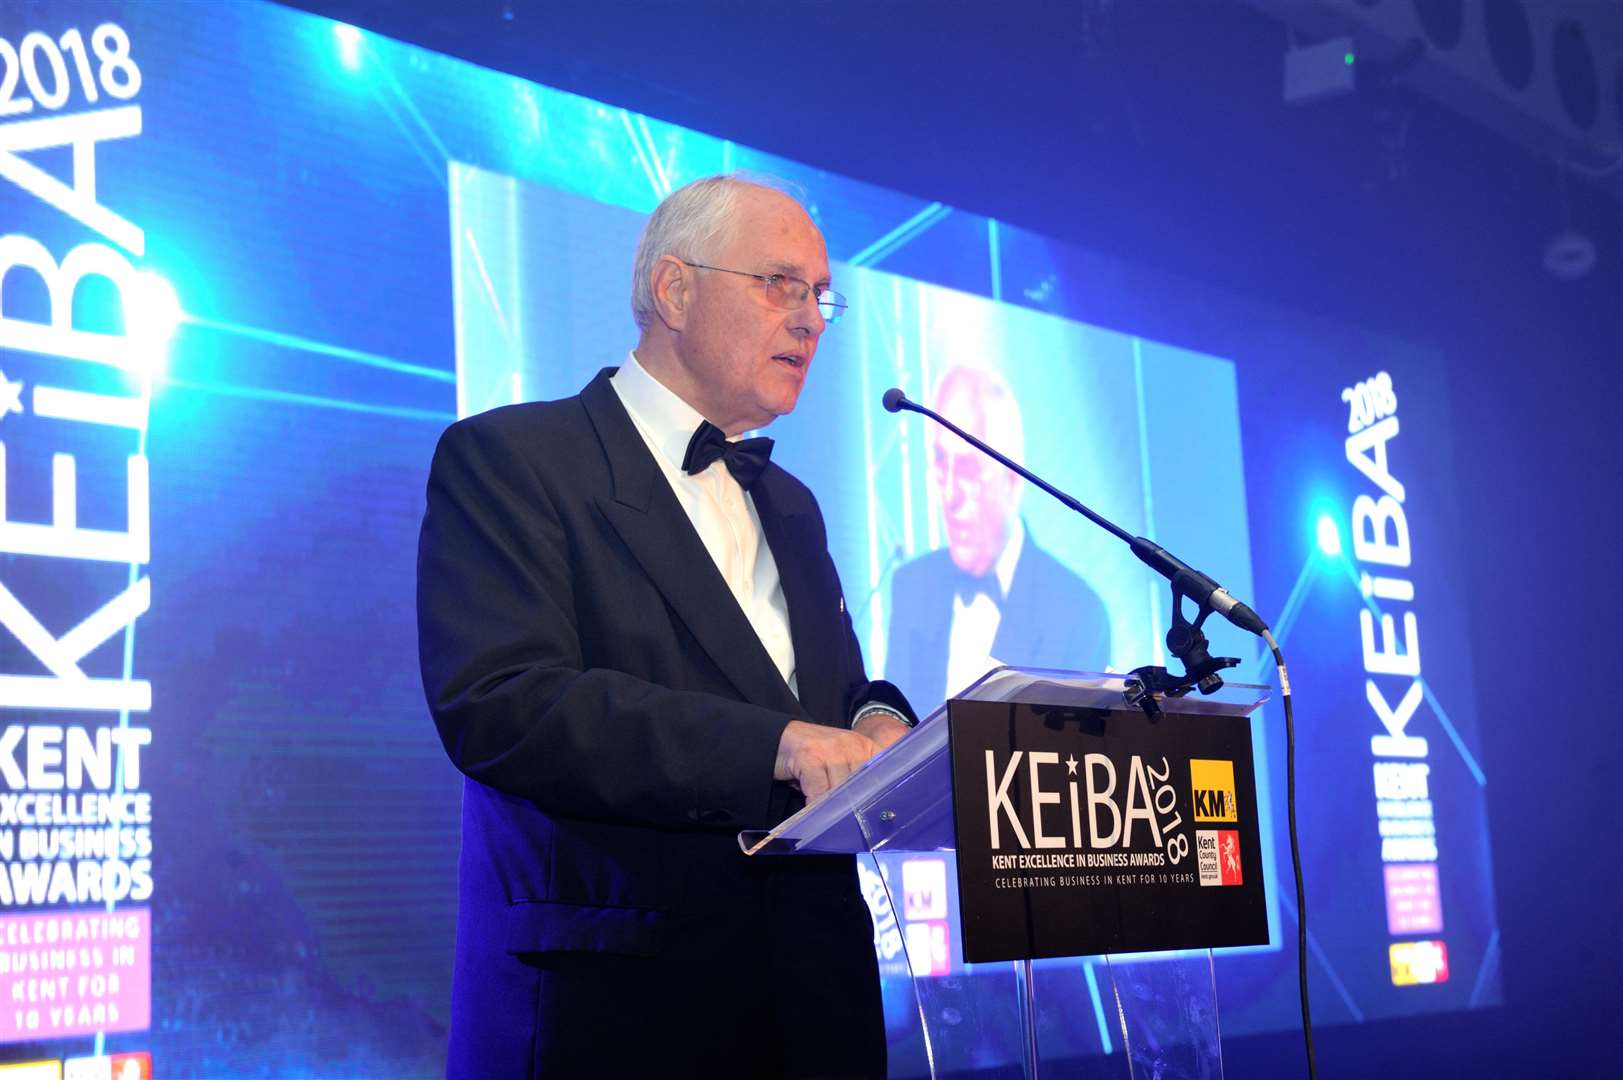 Chairman of the judging panel Geoff Miles as last year's gala awards ceremony